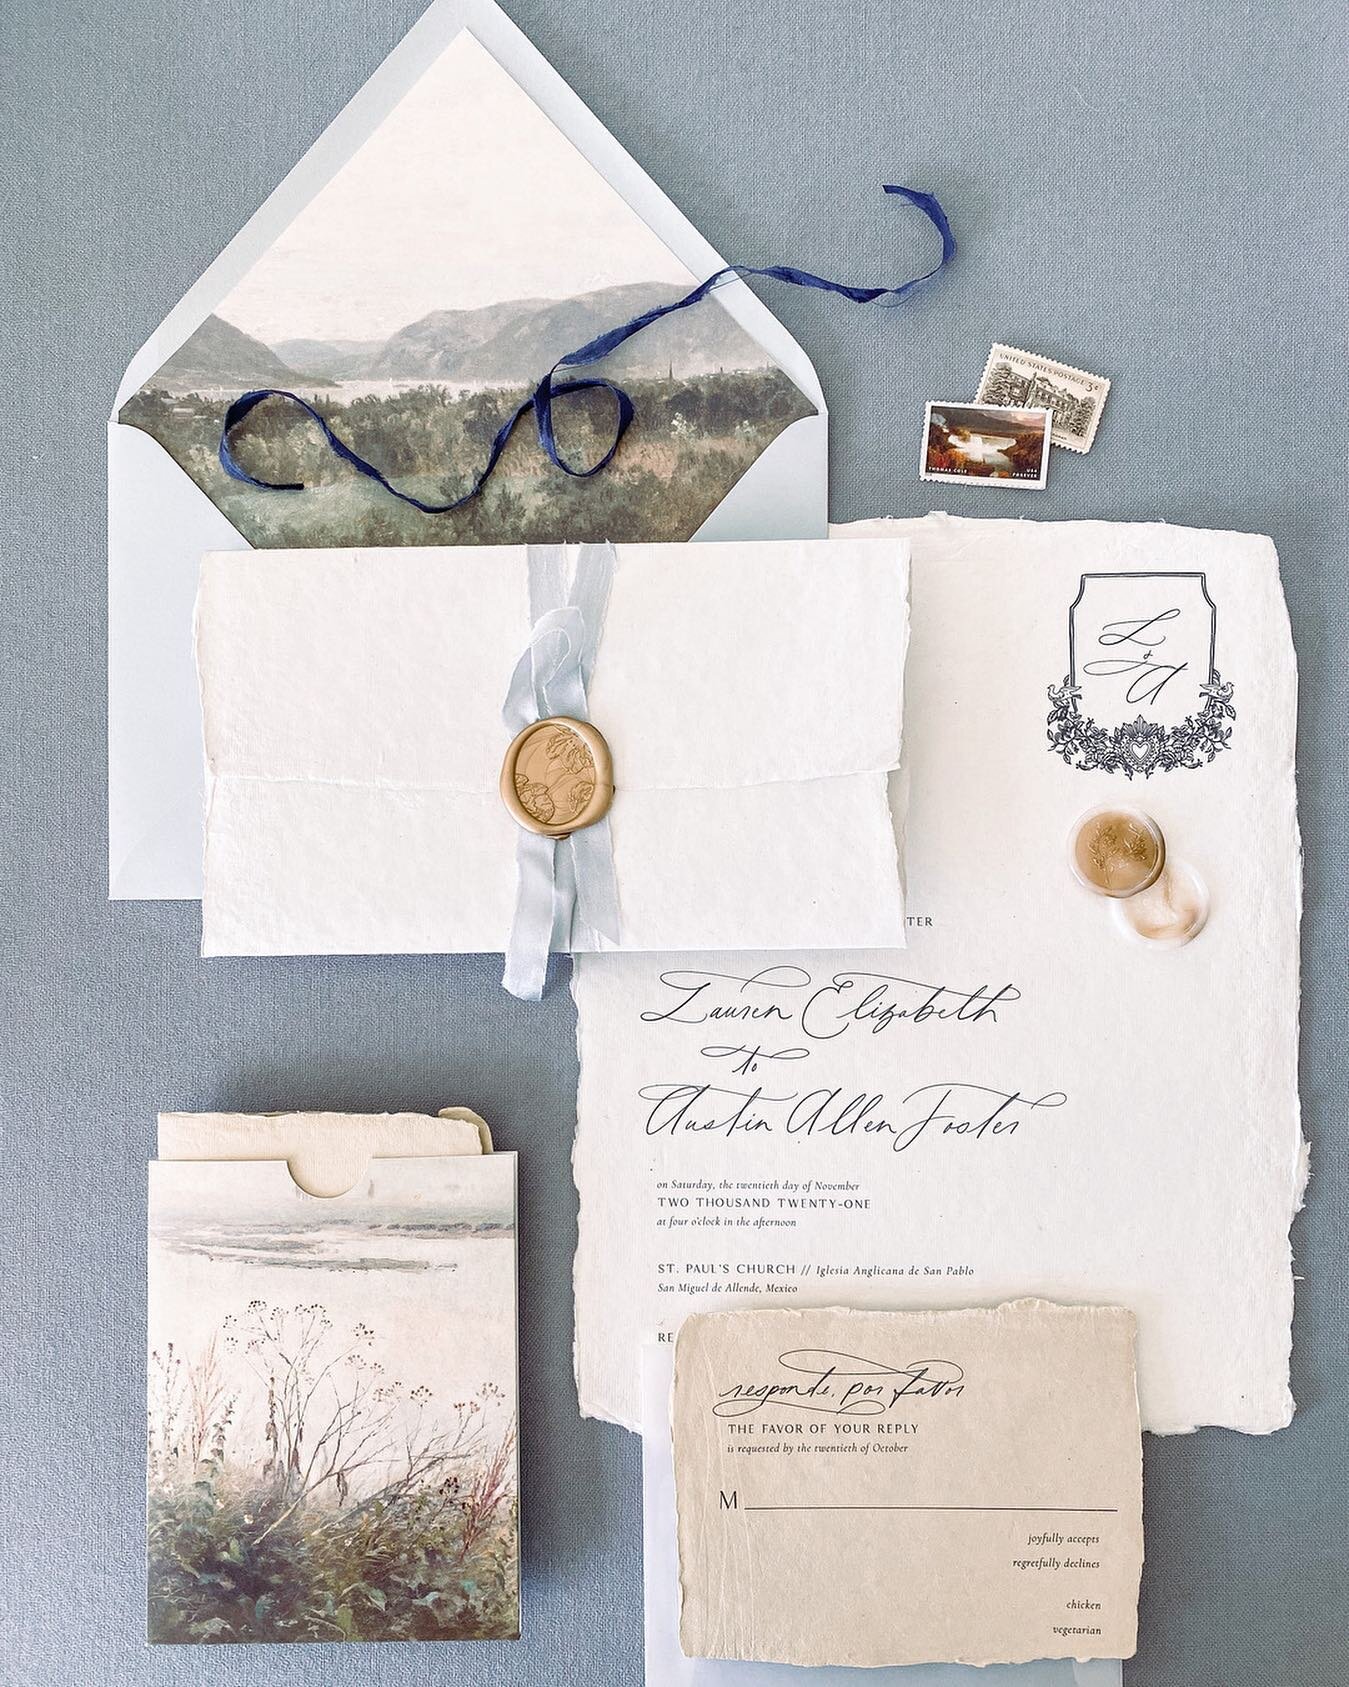 Just realizing I never shared a full look at one of my favorite custom suites to this date! For Lauren &amp; Austin, we did a letter style invitation with French blue ribbon and an oval wax seal. We incorporated lots of vintage paintings and handmade